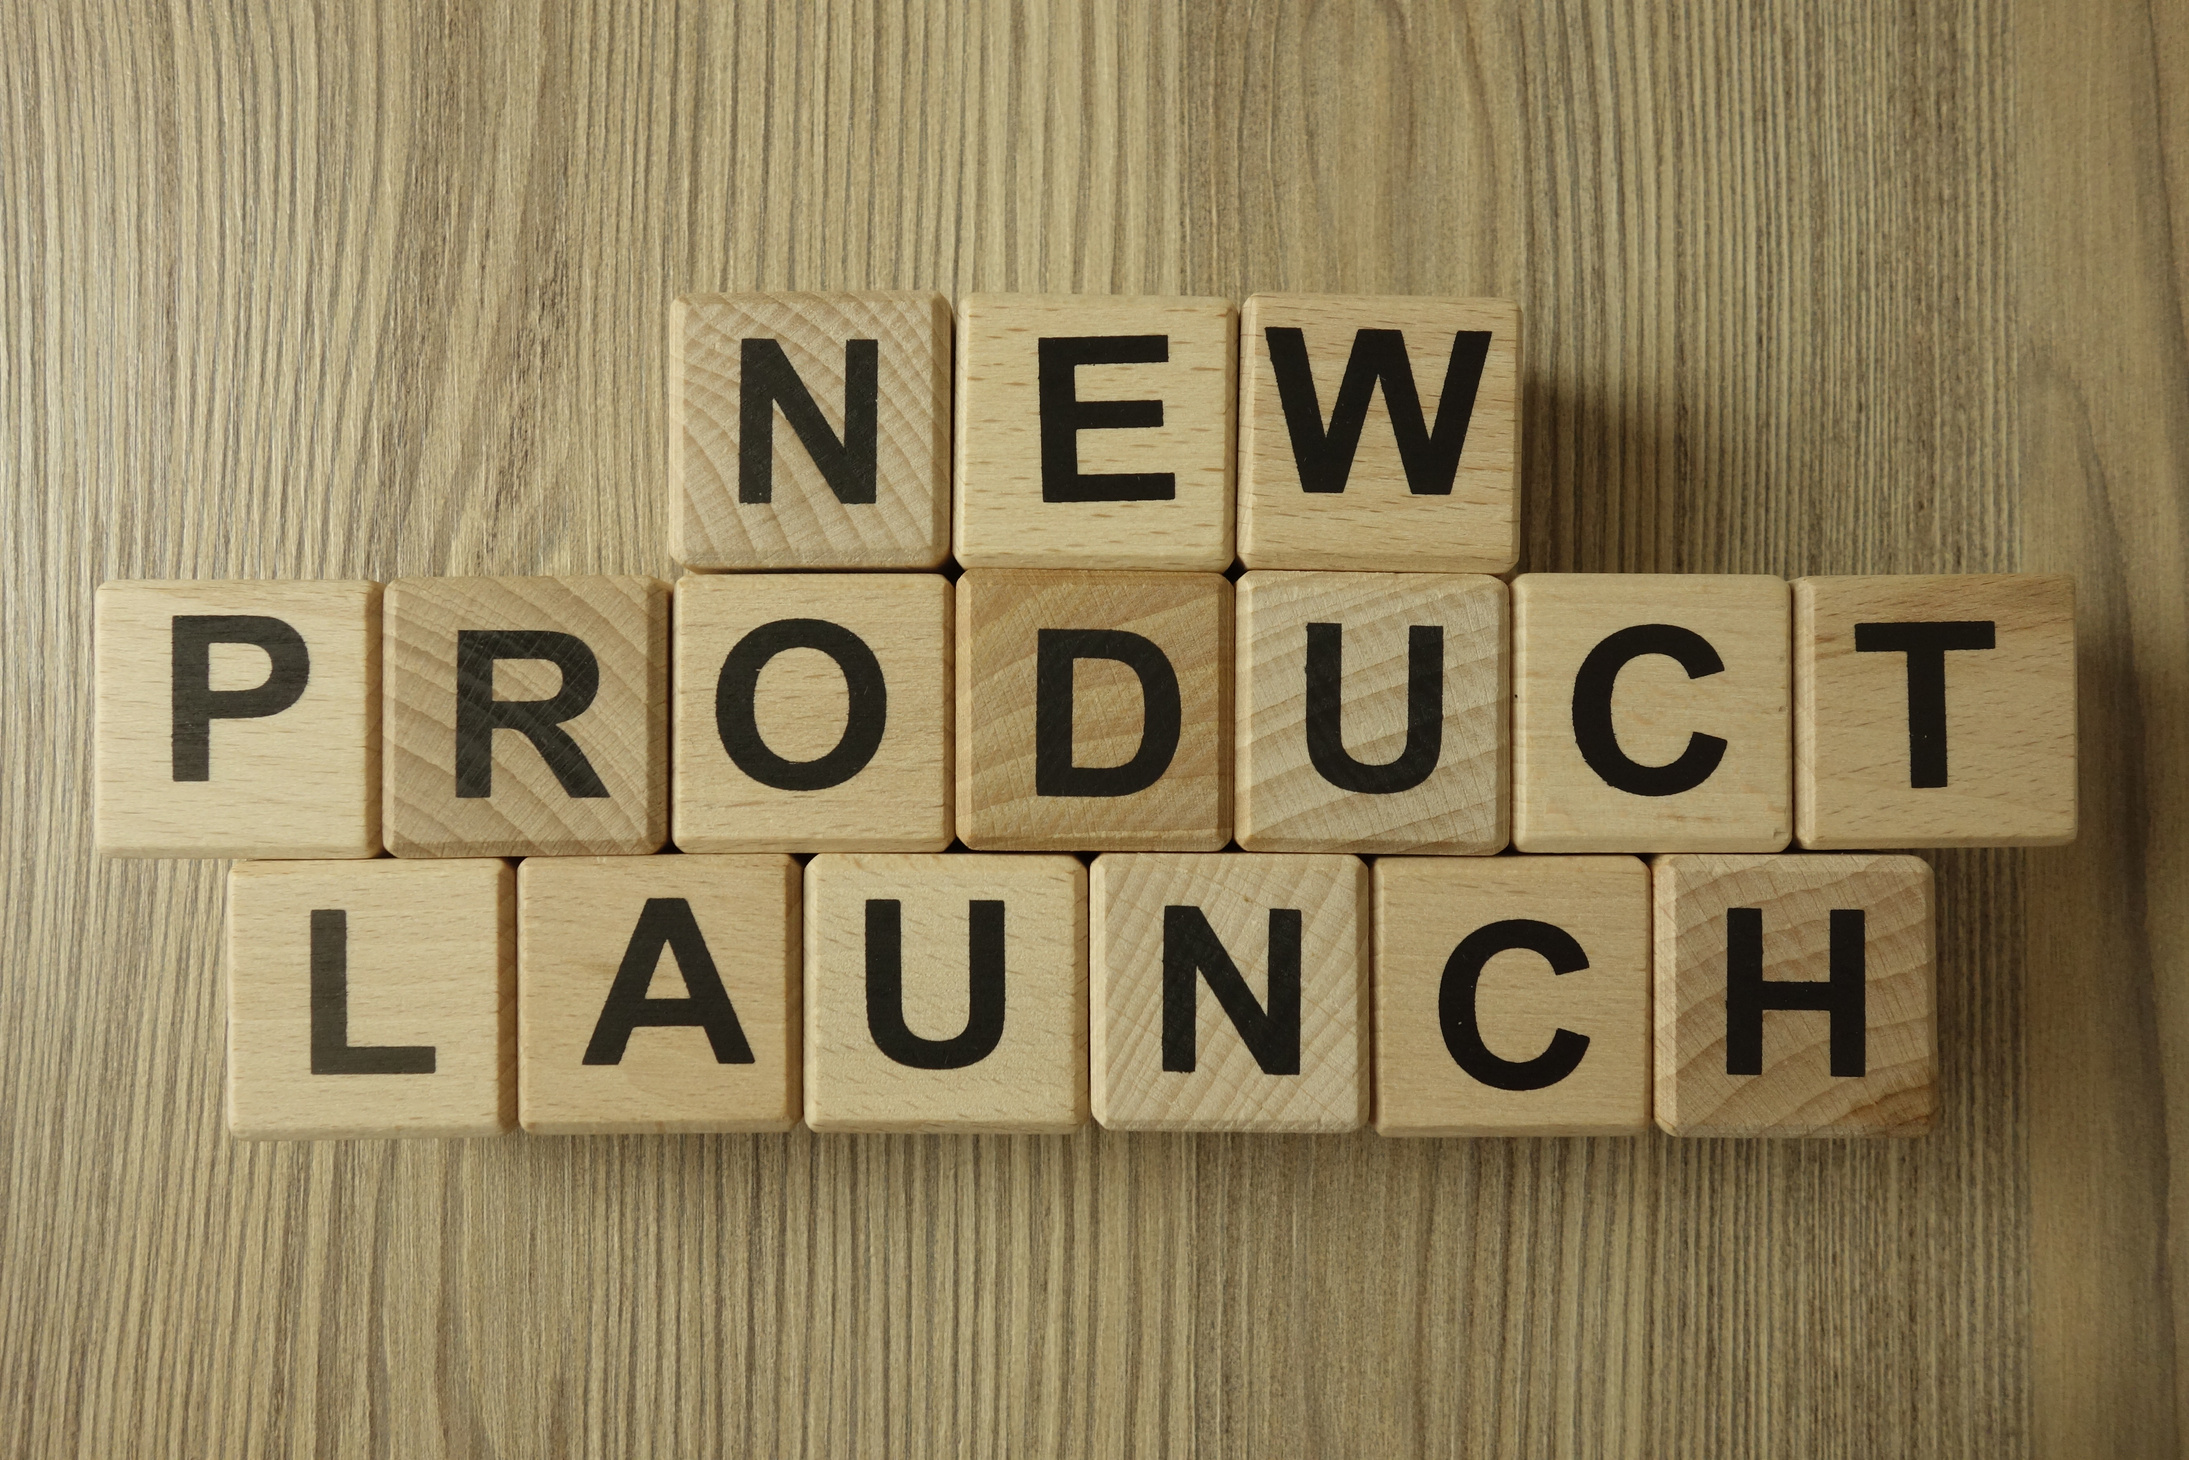 New product launch text from wooden blocks